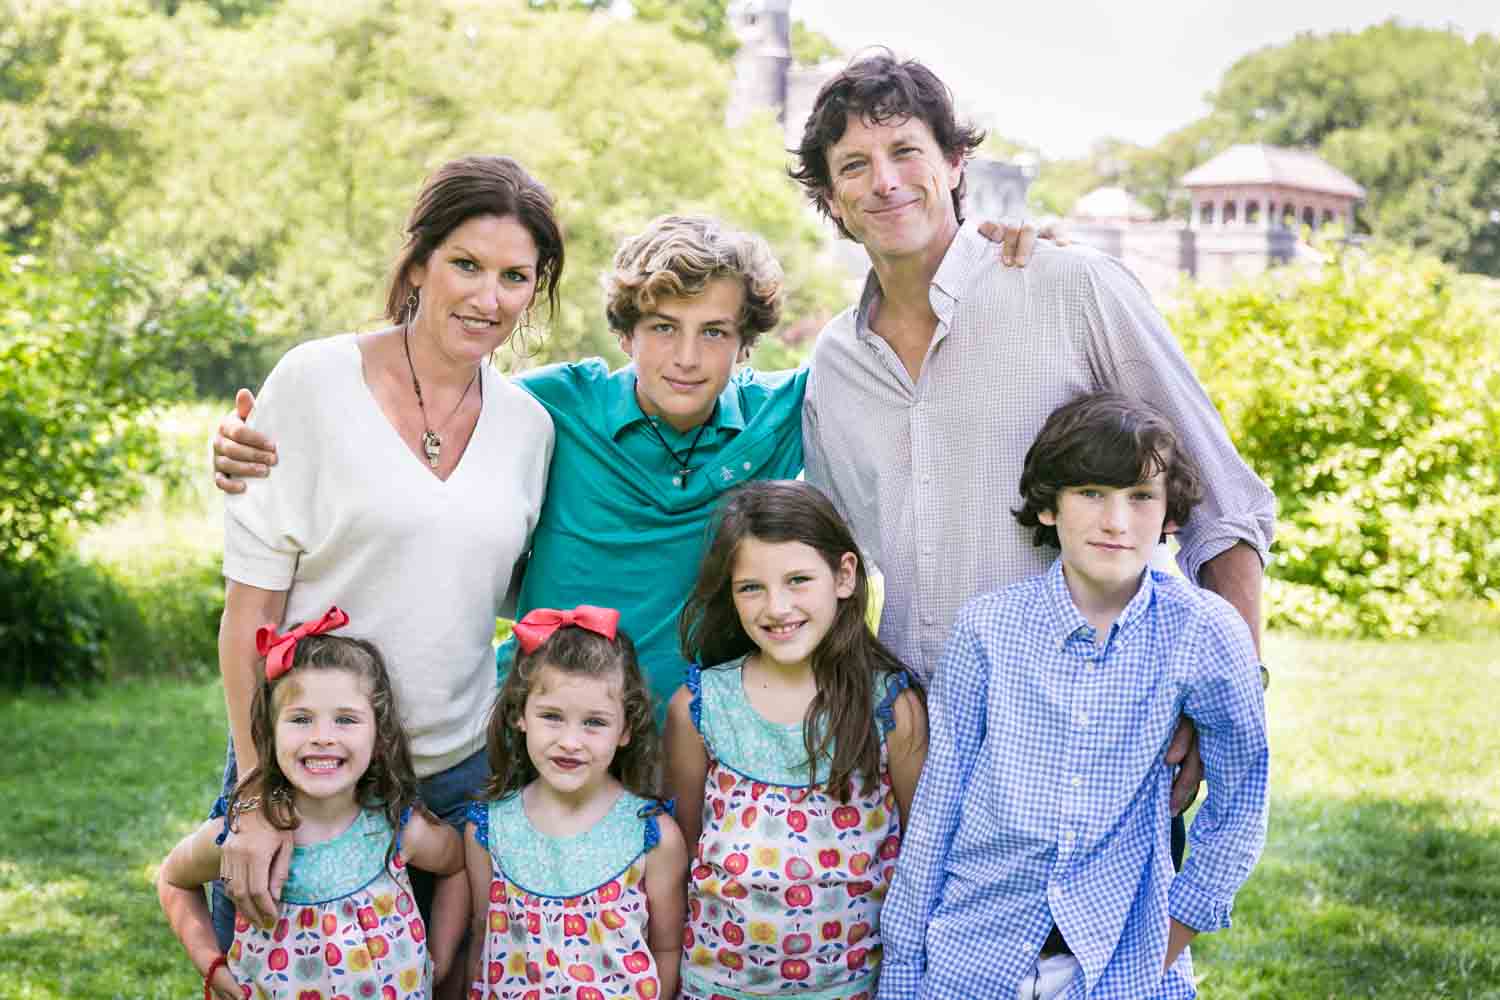 Family portrait in Central Park for an article on how to get natural smiles out of children